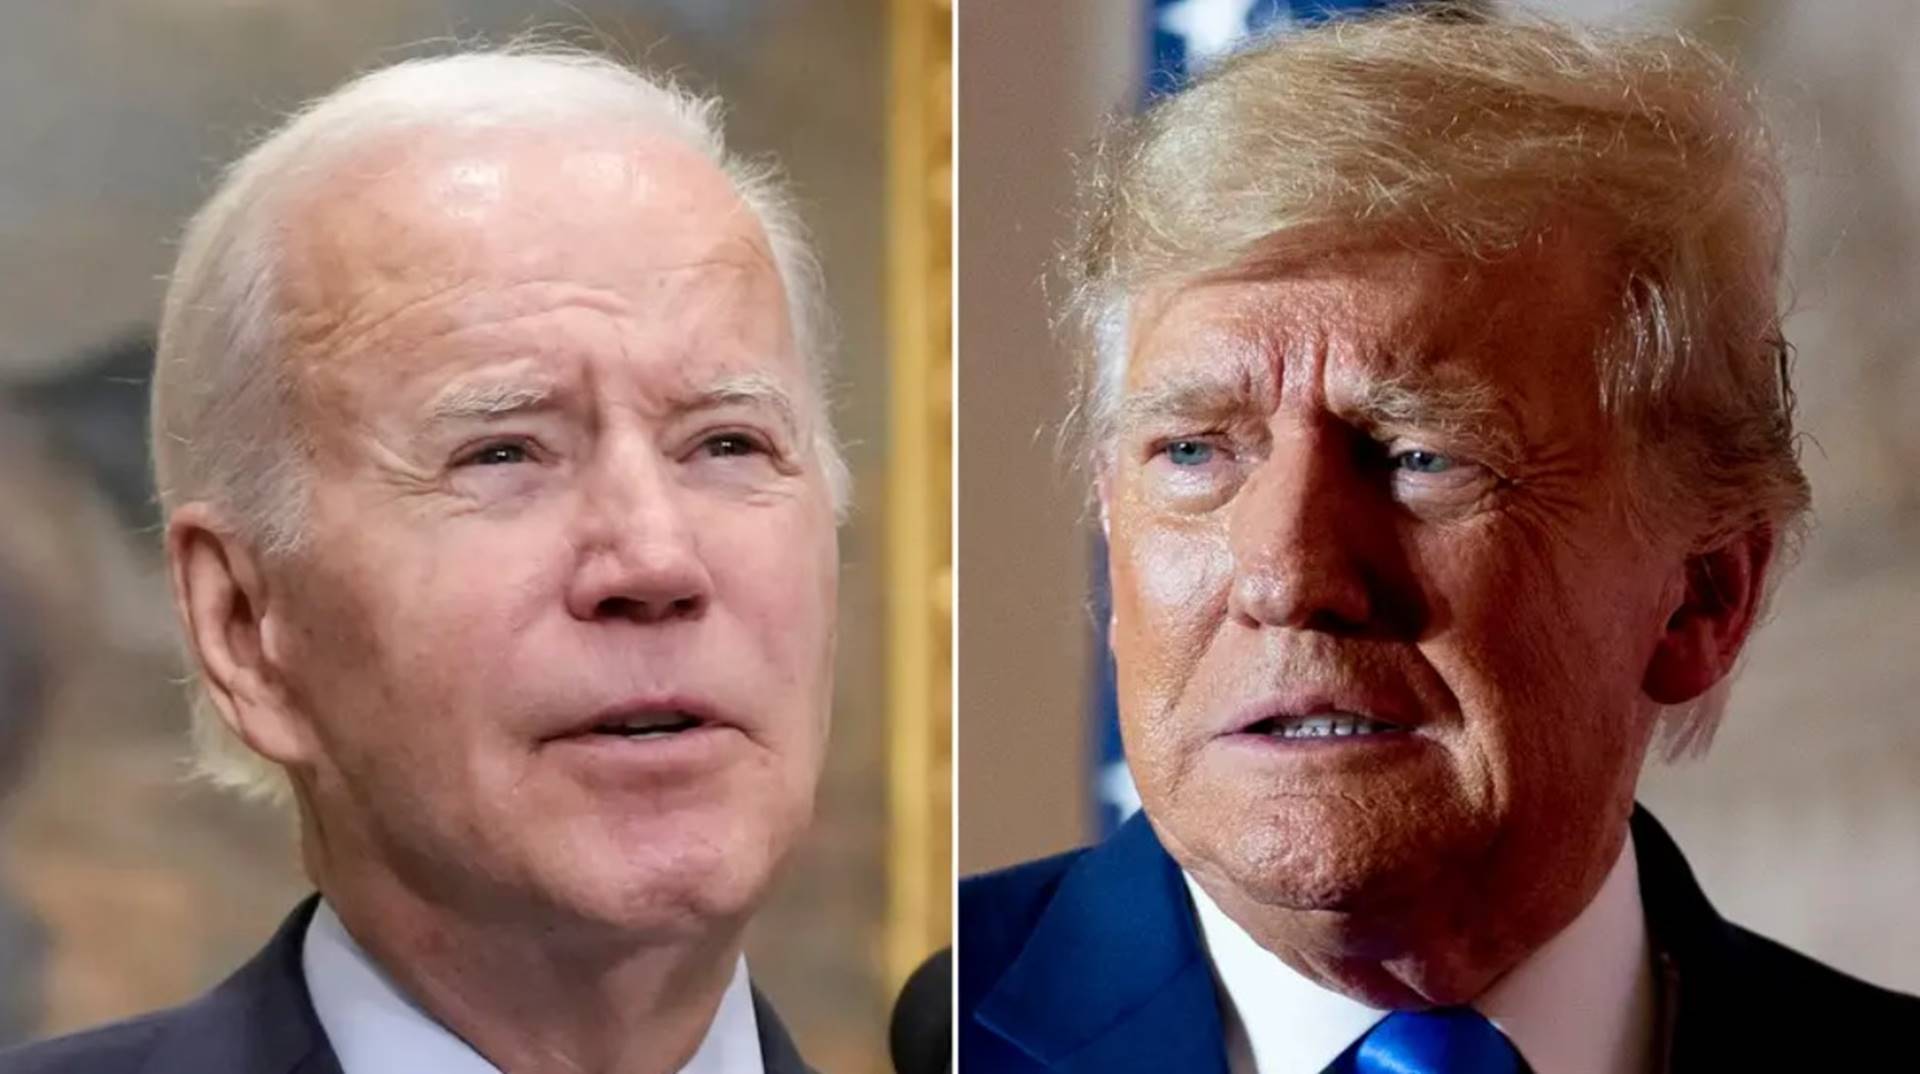 Twitter granted requests from the Trump White House and the Biden campaign to remove the content in 2020